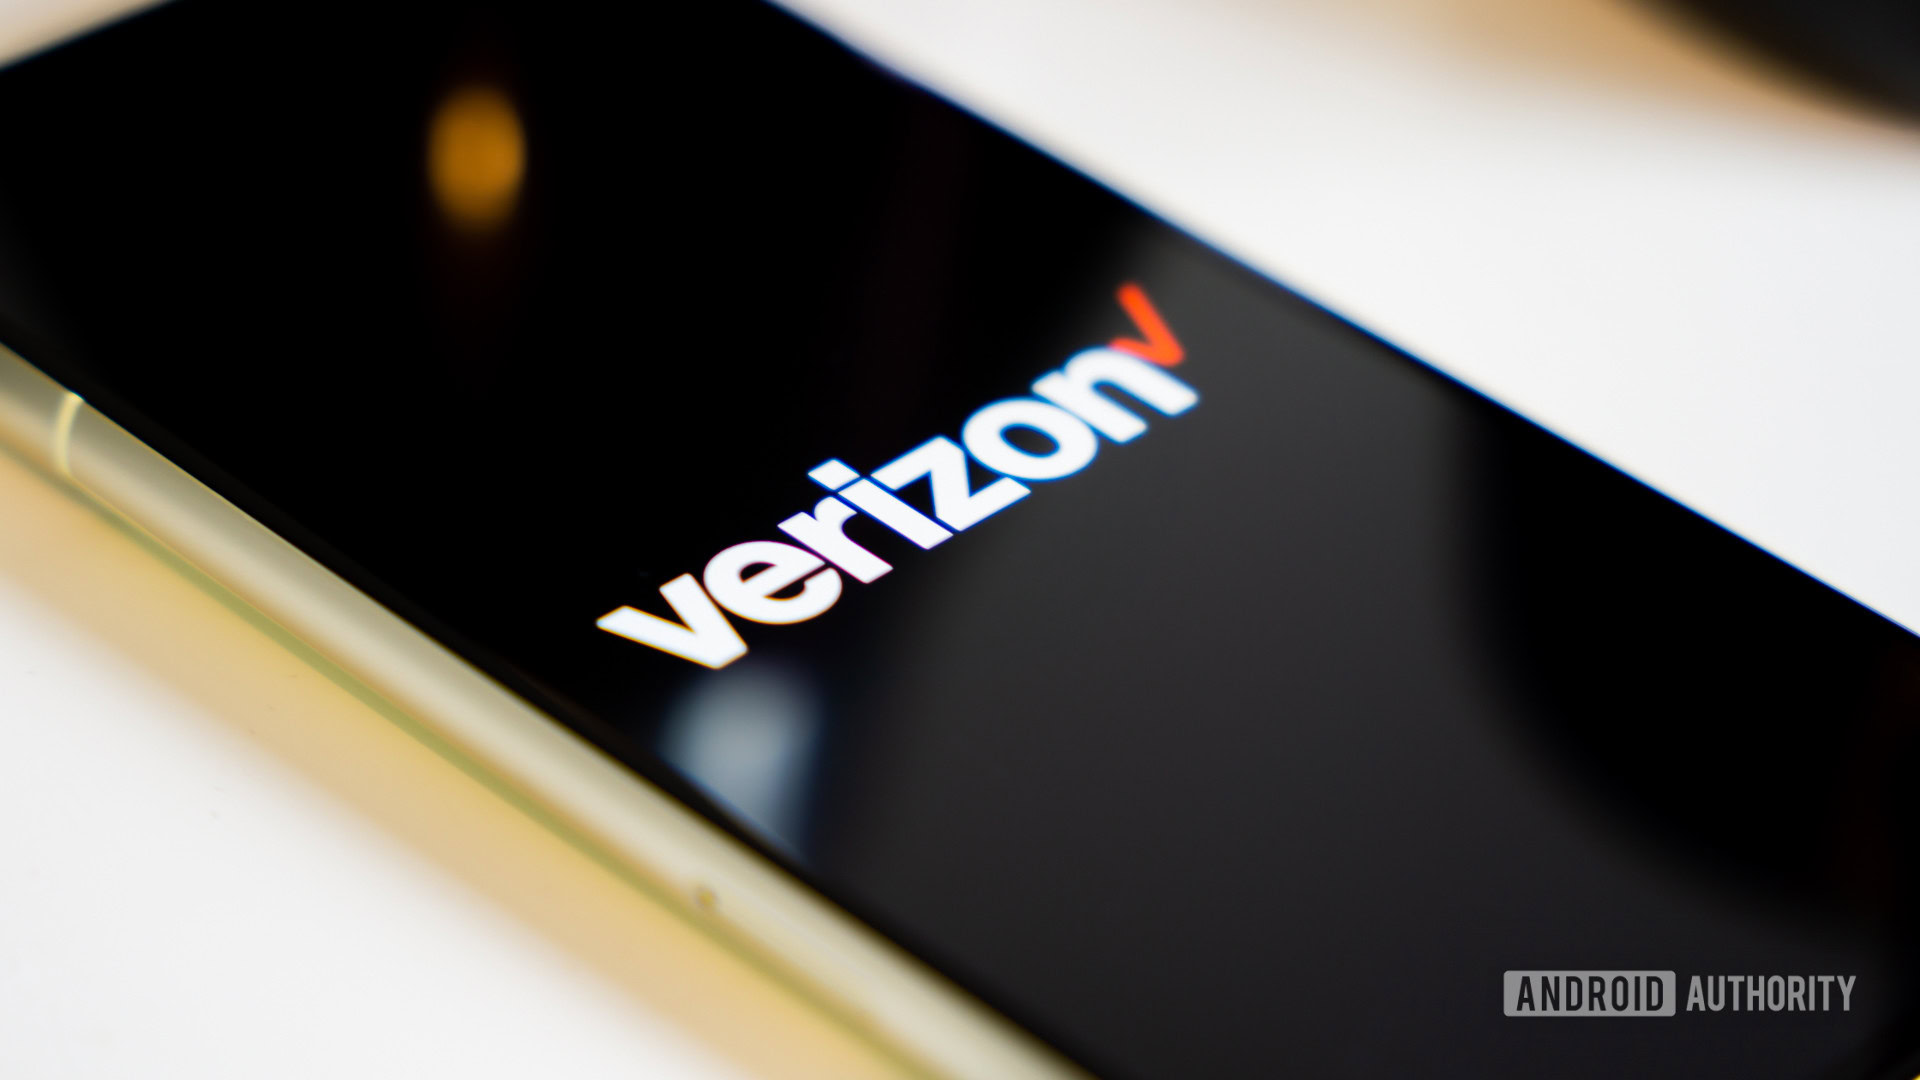 Verizon’s Network in a Box aims to solve connectivity issues at events